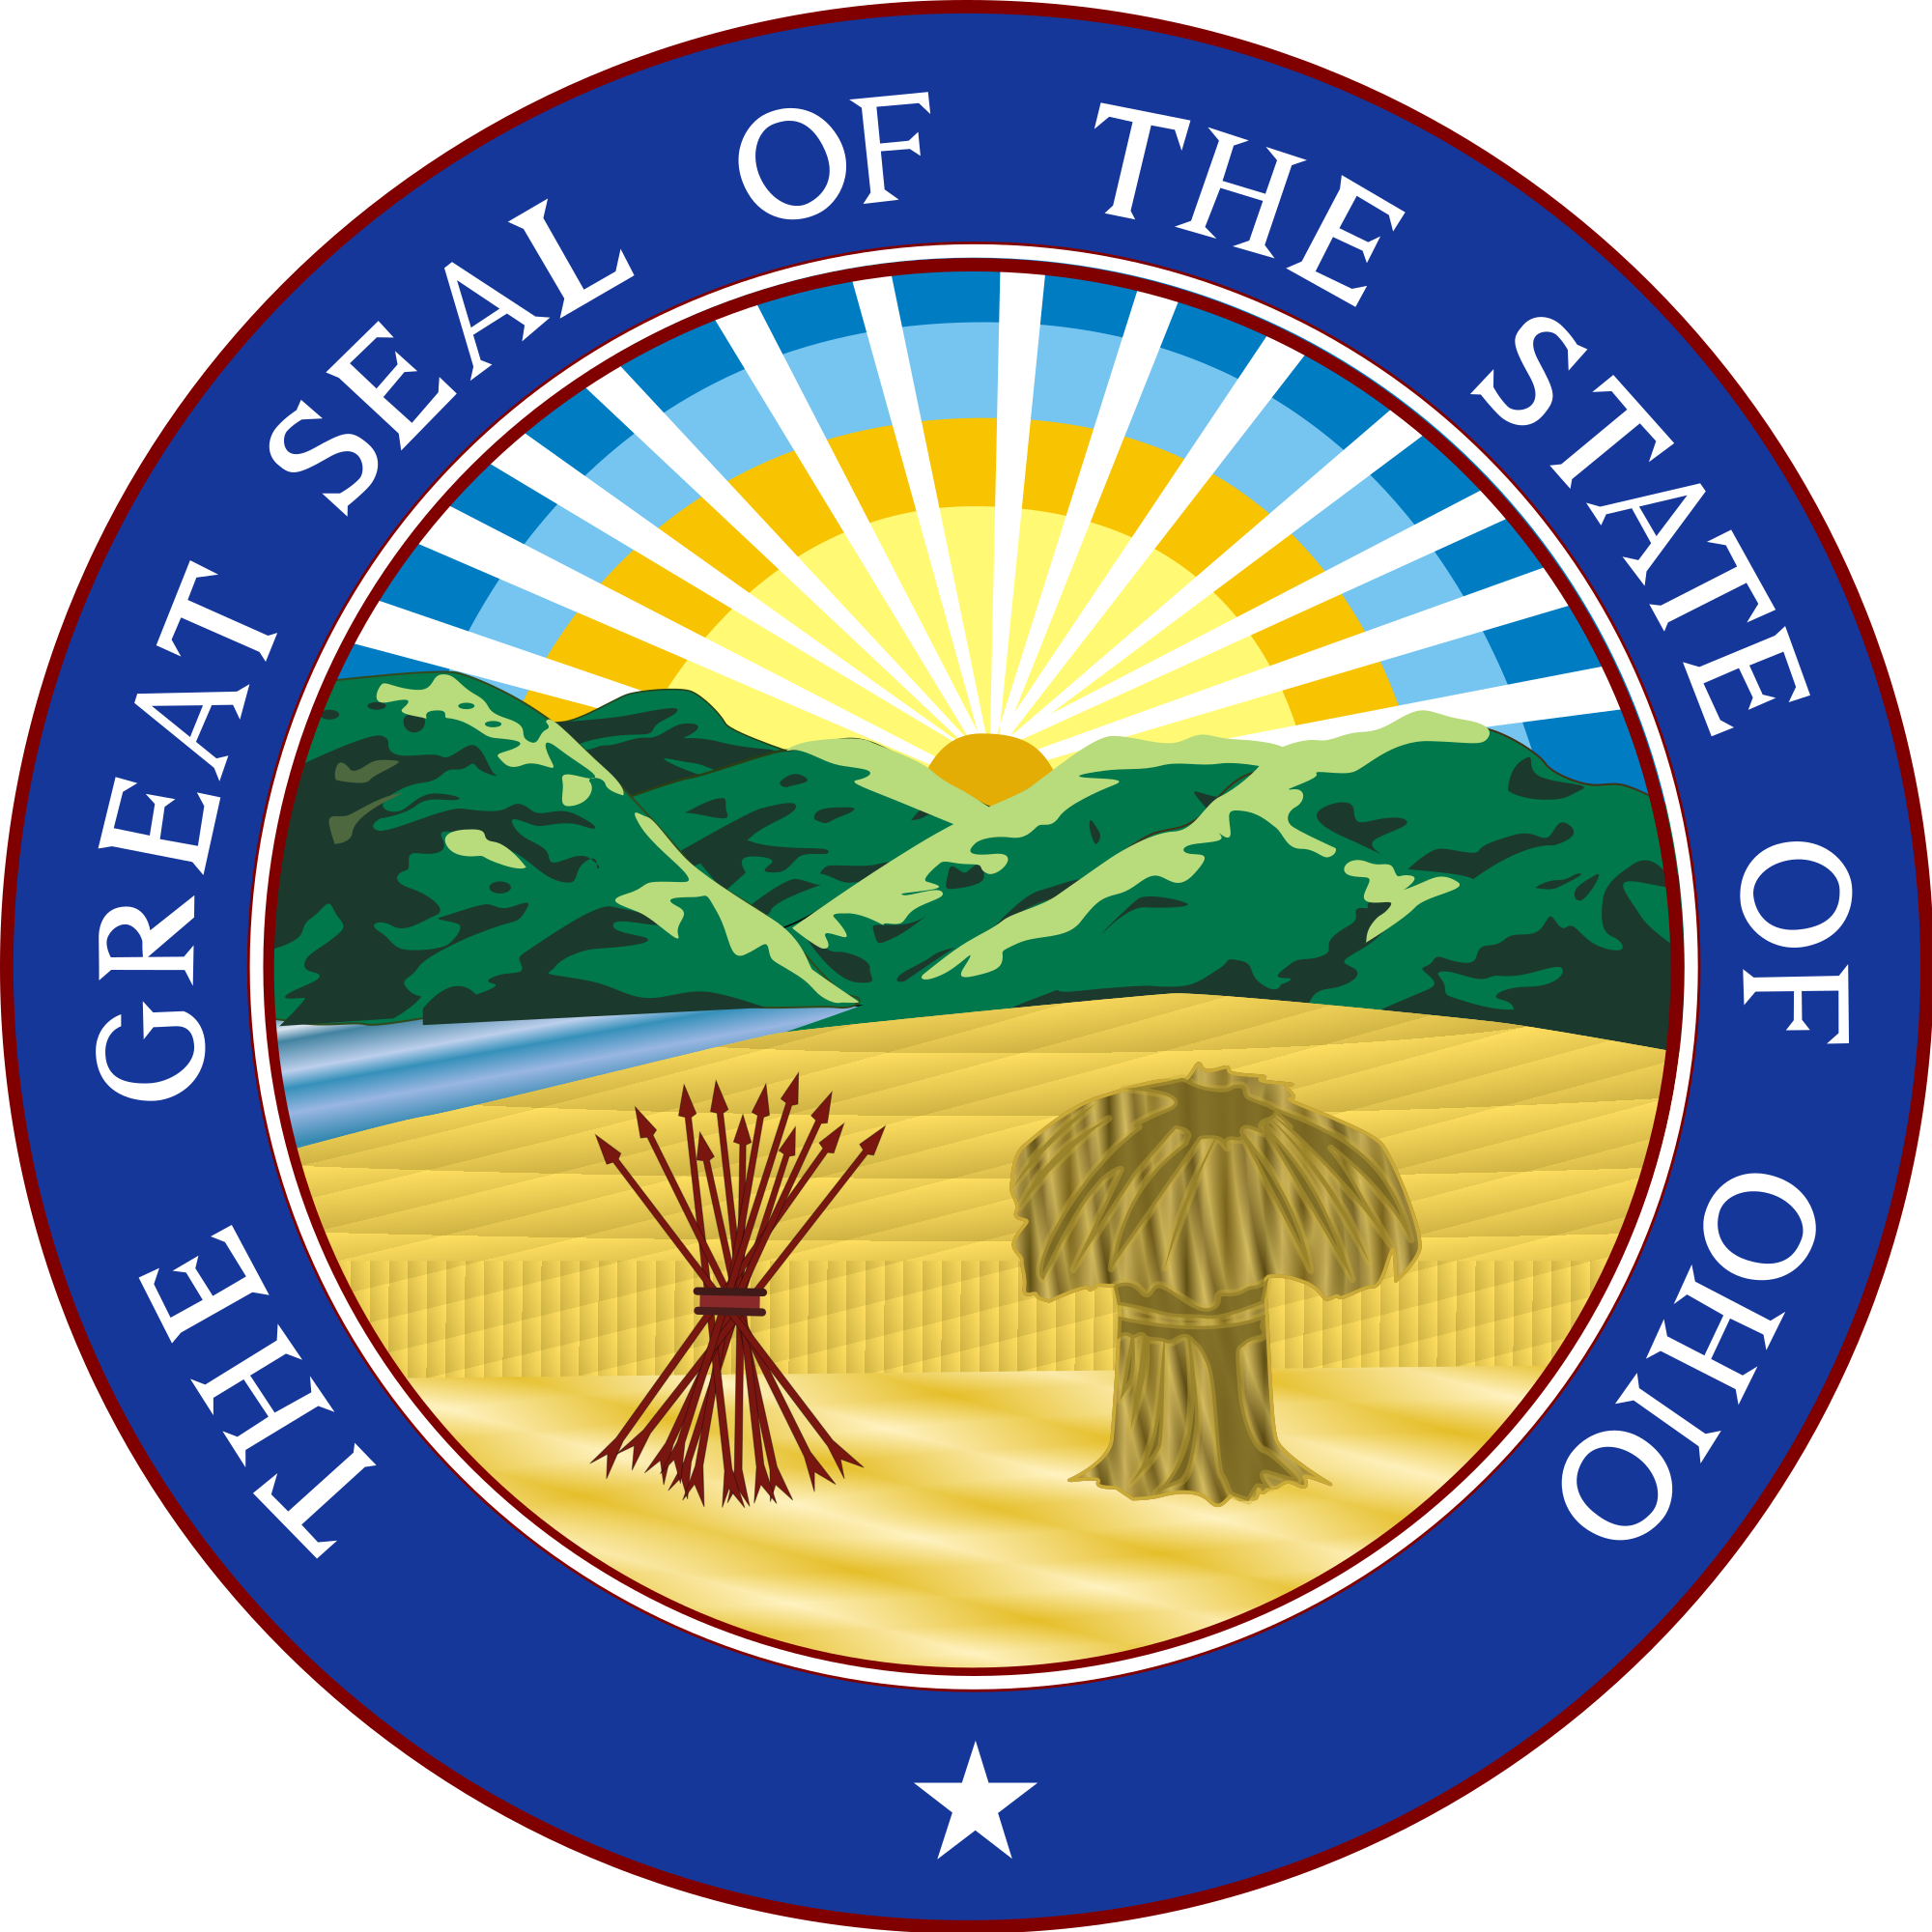 2000px-Seal_of_Ohio.svg